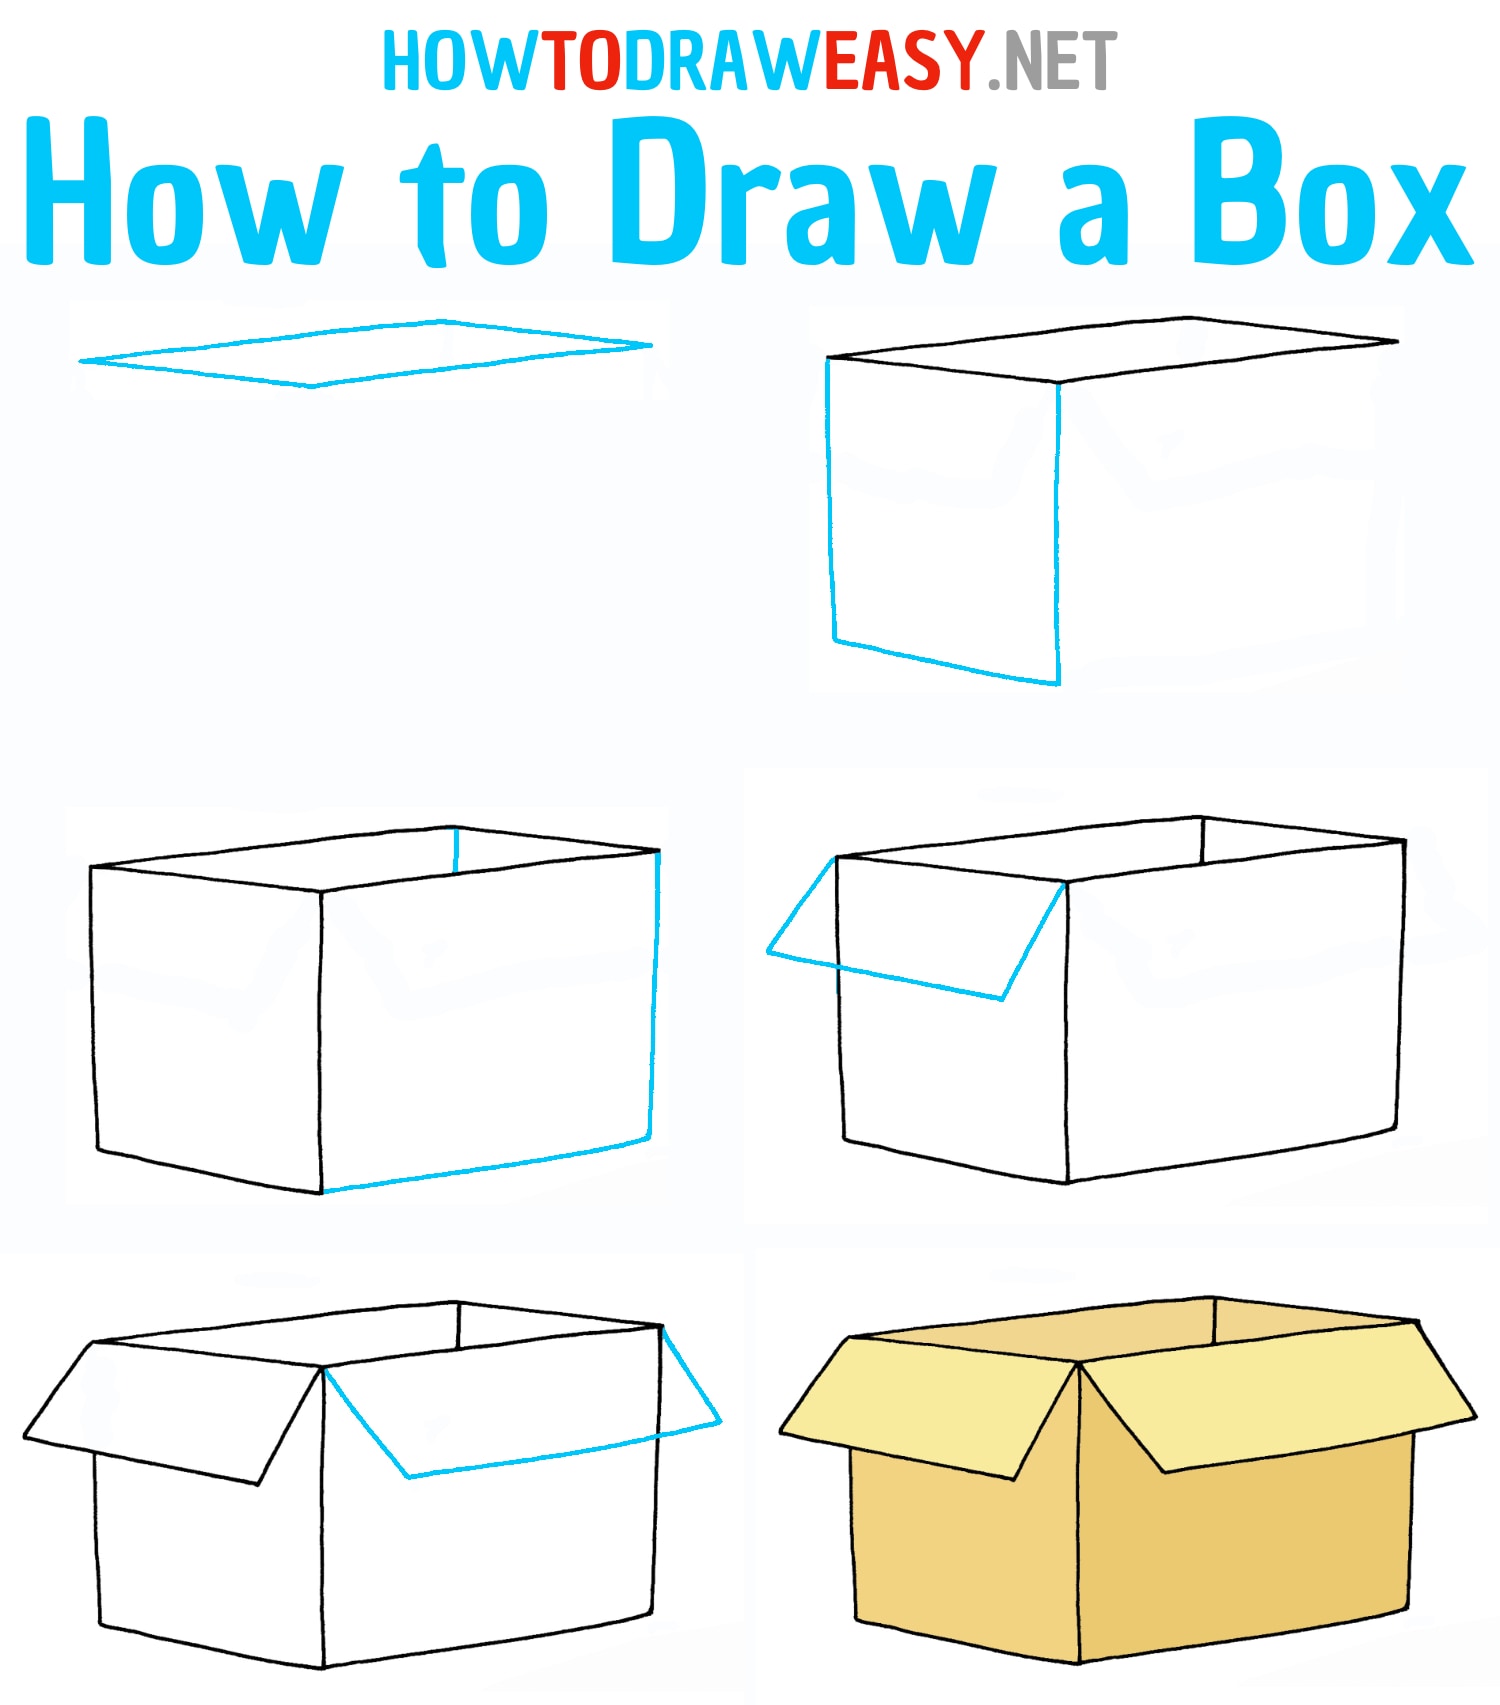 How to Draw a Box Step by Step